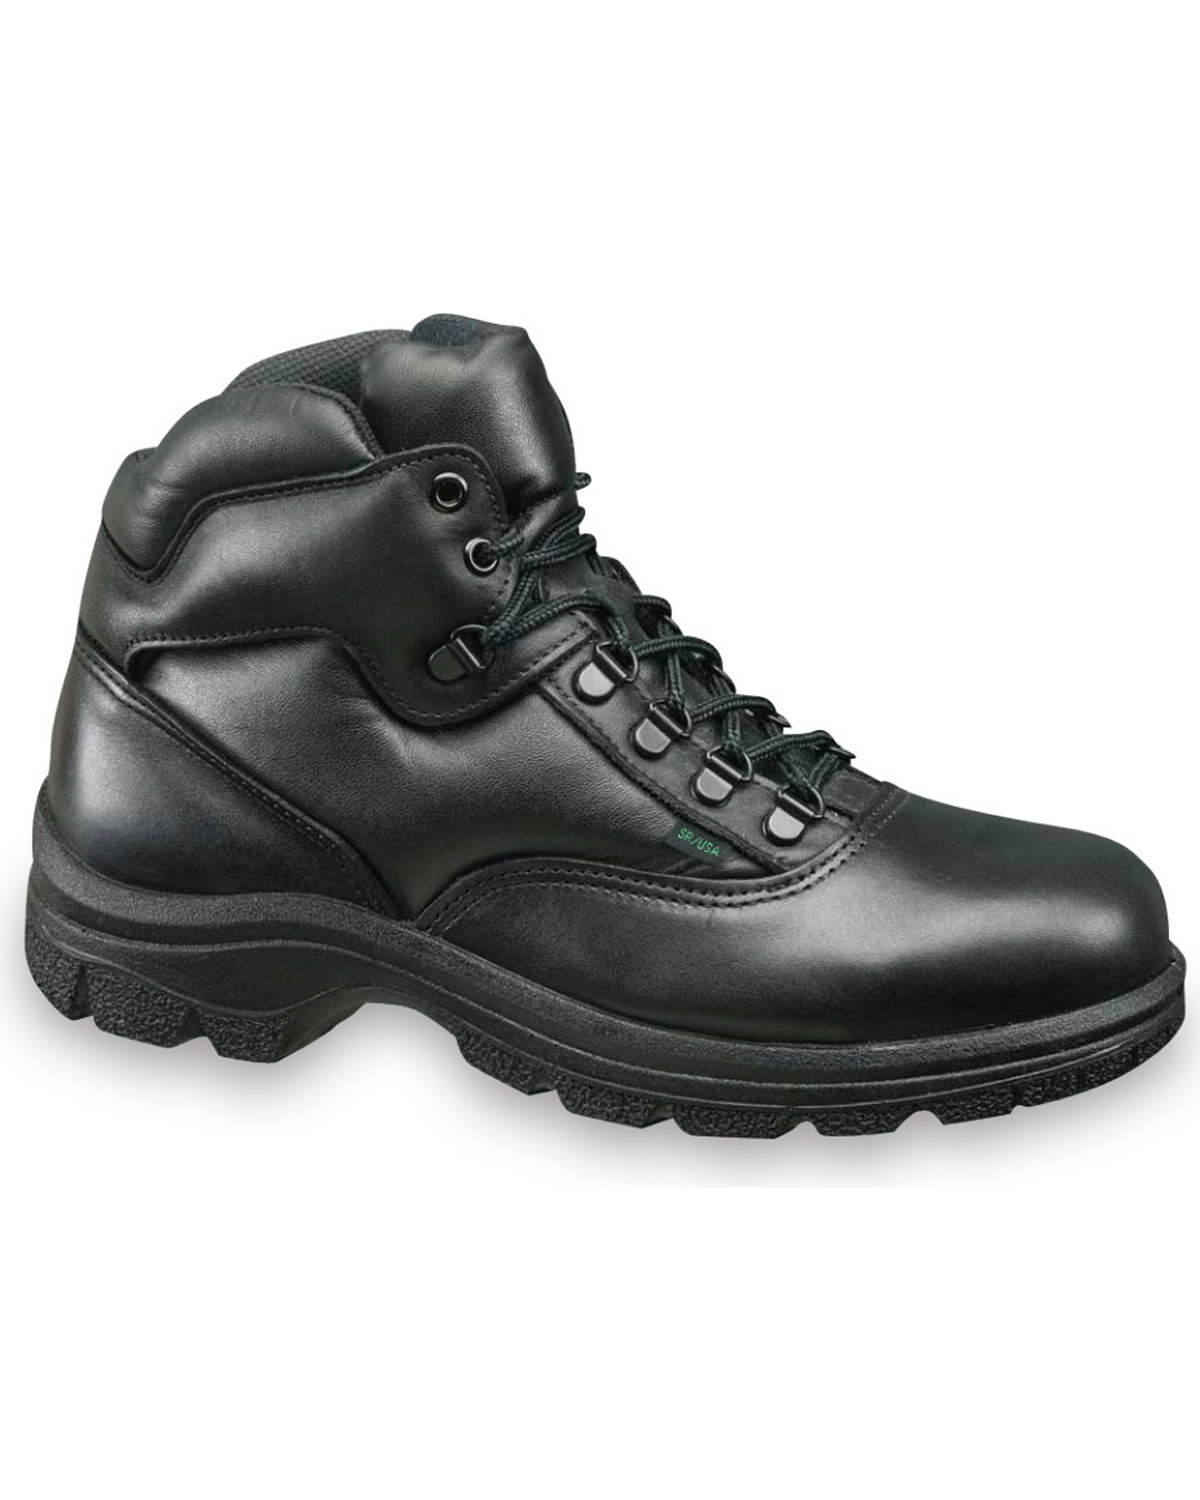 black trainer boots